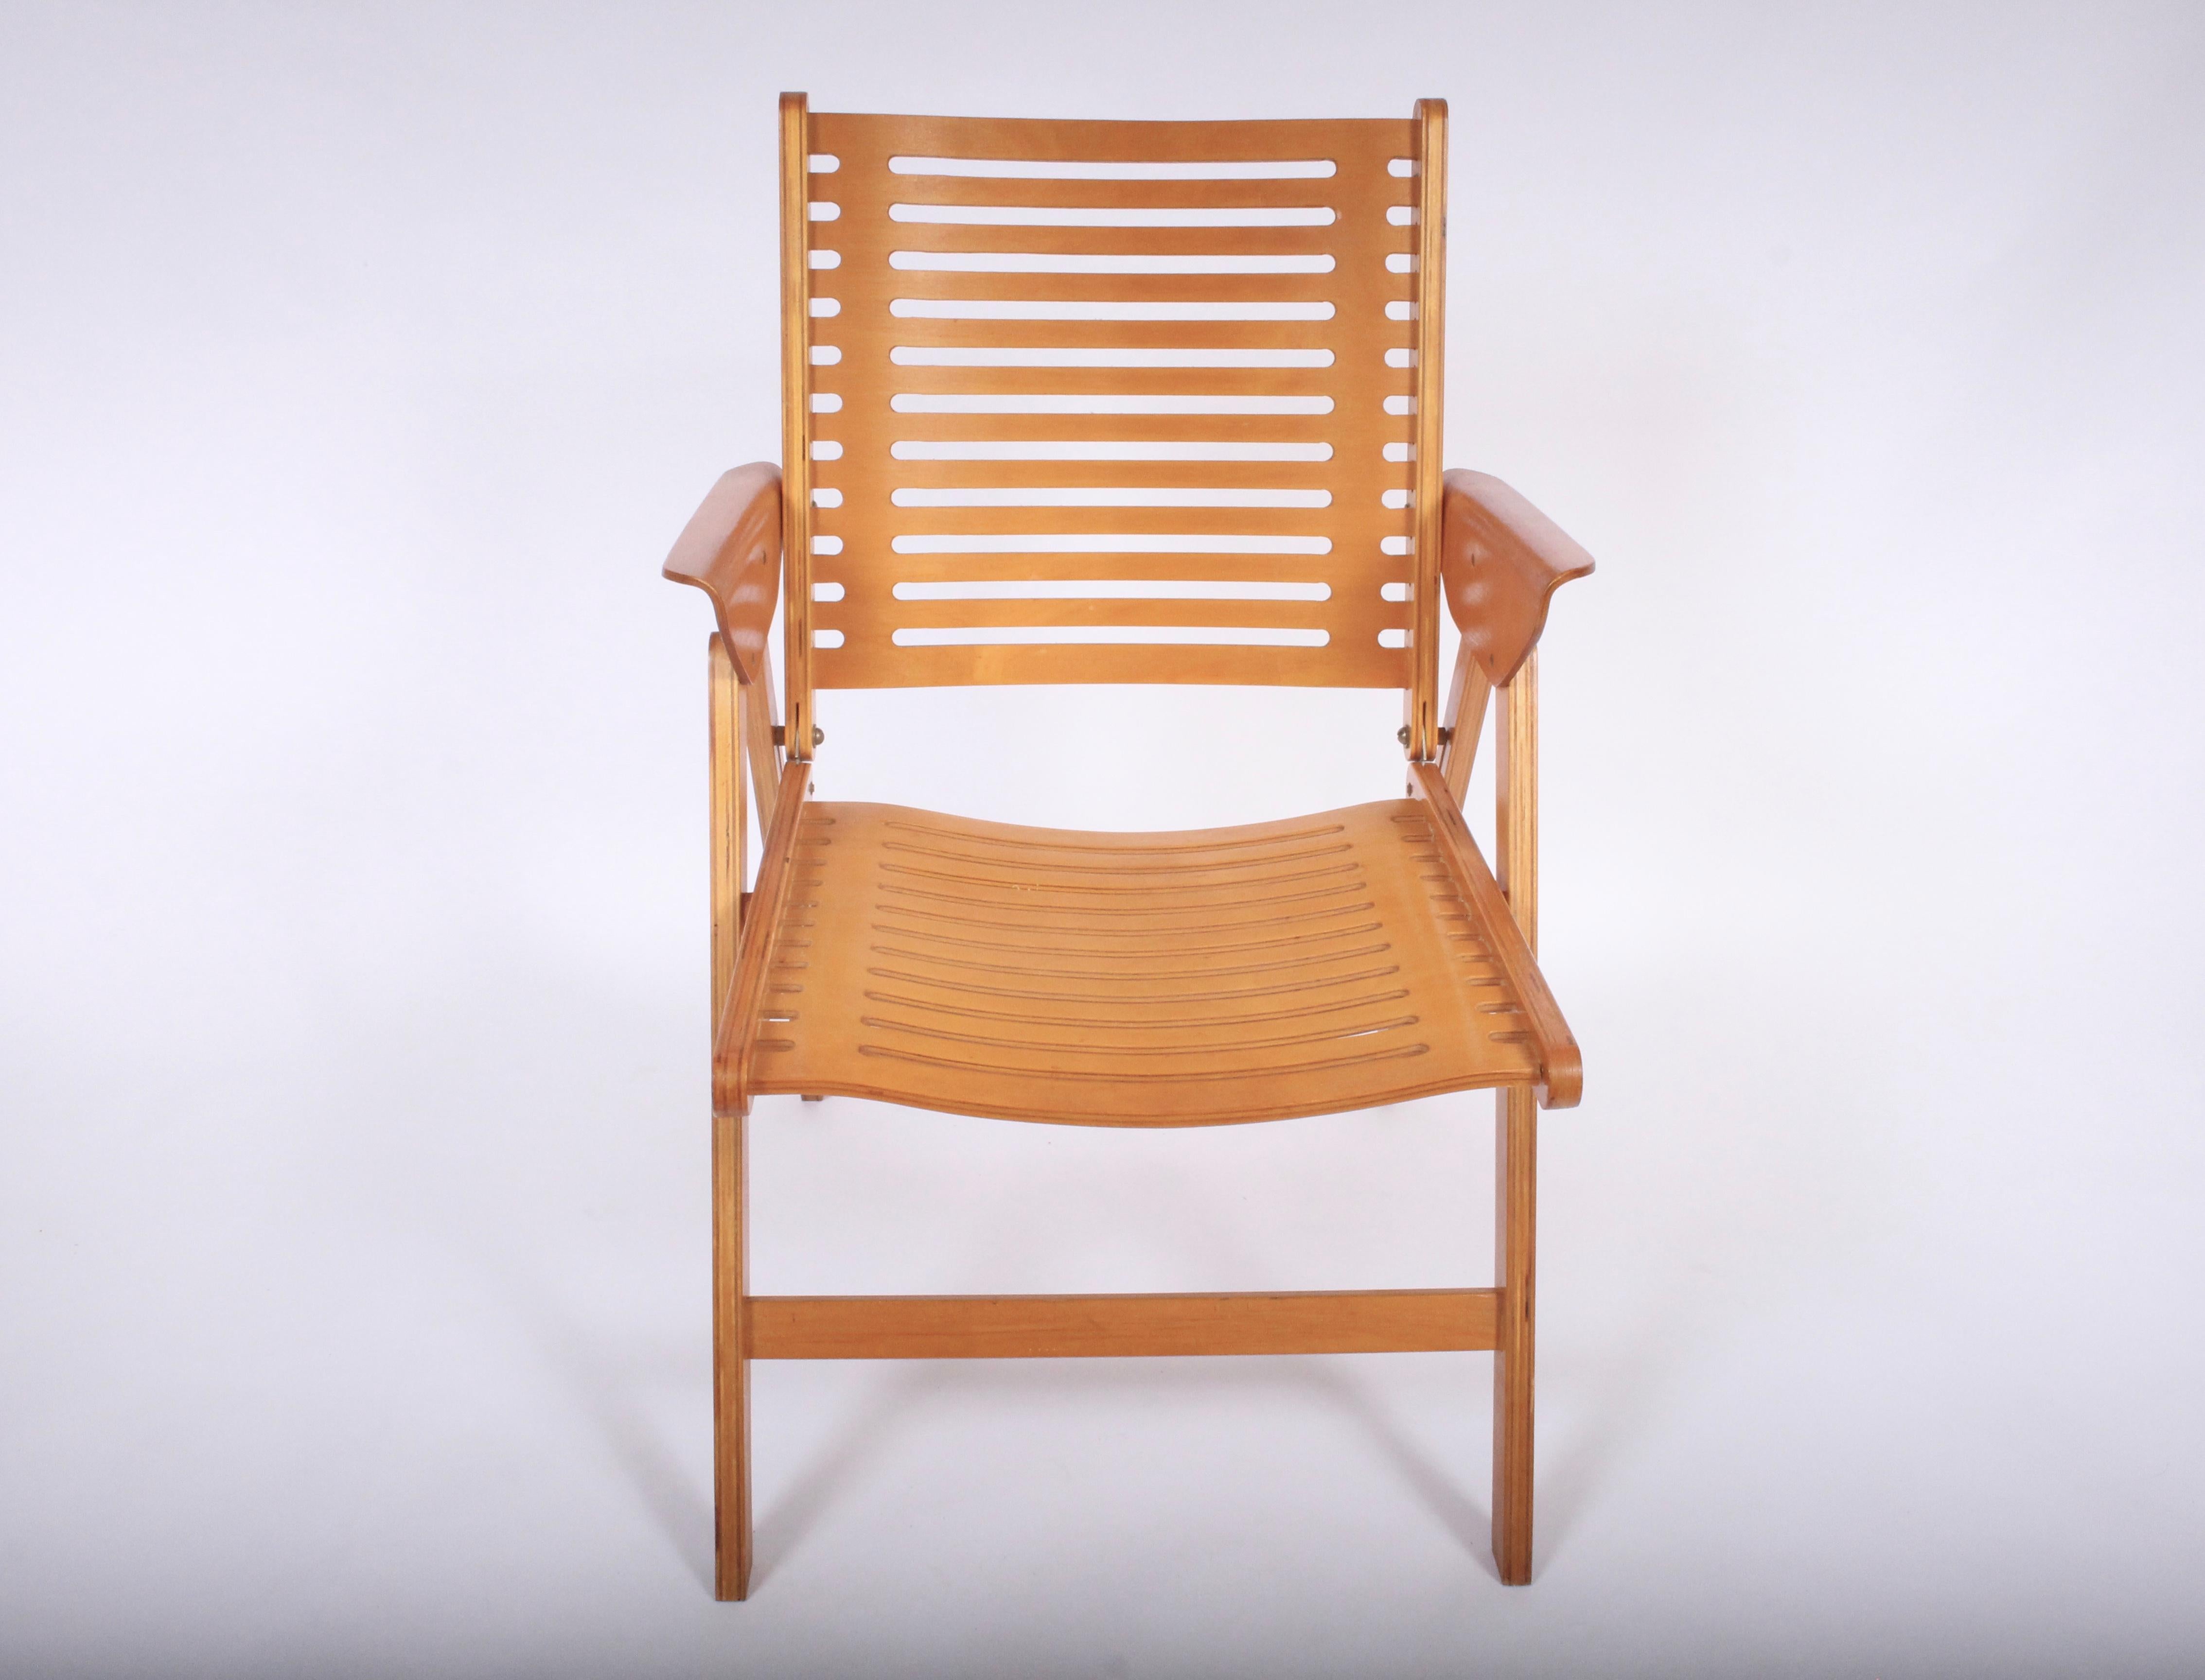 Early single Niko Kralj Stol Rex blonde beech bentwood folding chair. Designed in 1952. Featuring molded beech plywood with contoured back, ergonomic, curved and wide seat and cutouts to seat and back. Comfortable. Classic. Minimalist.  Easy to